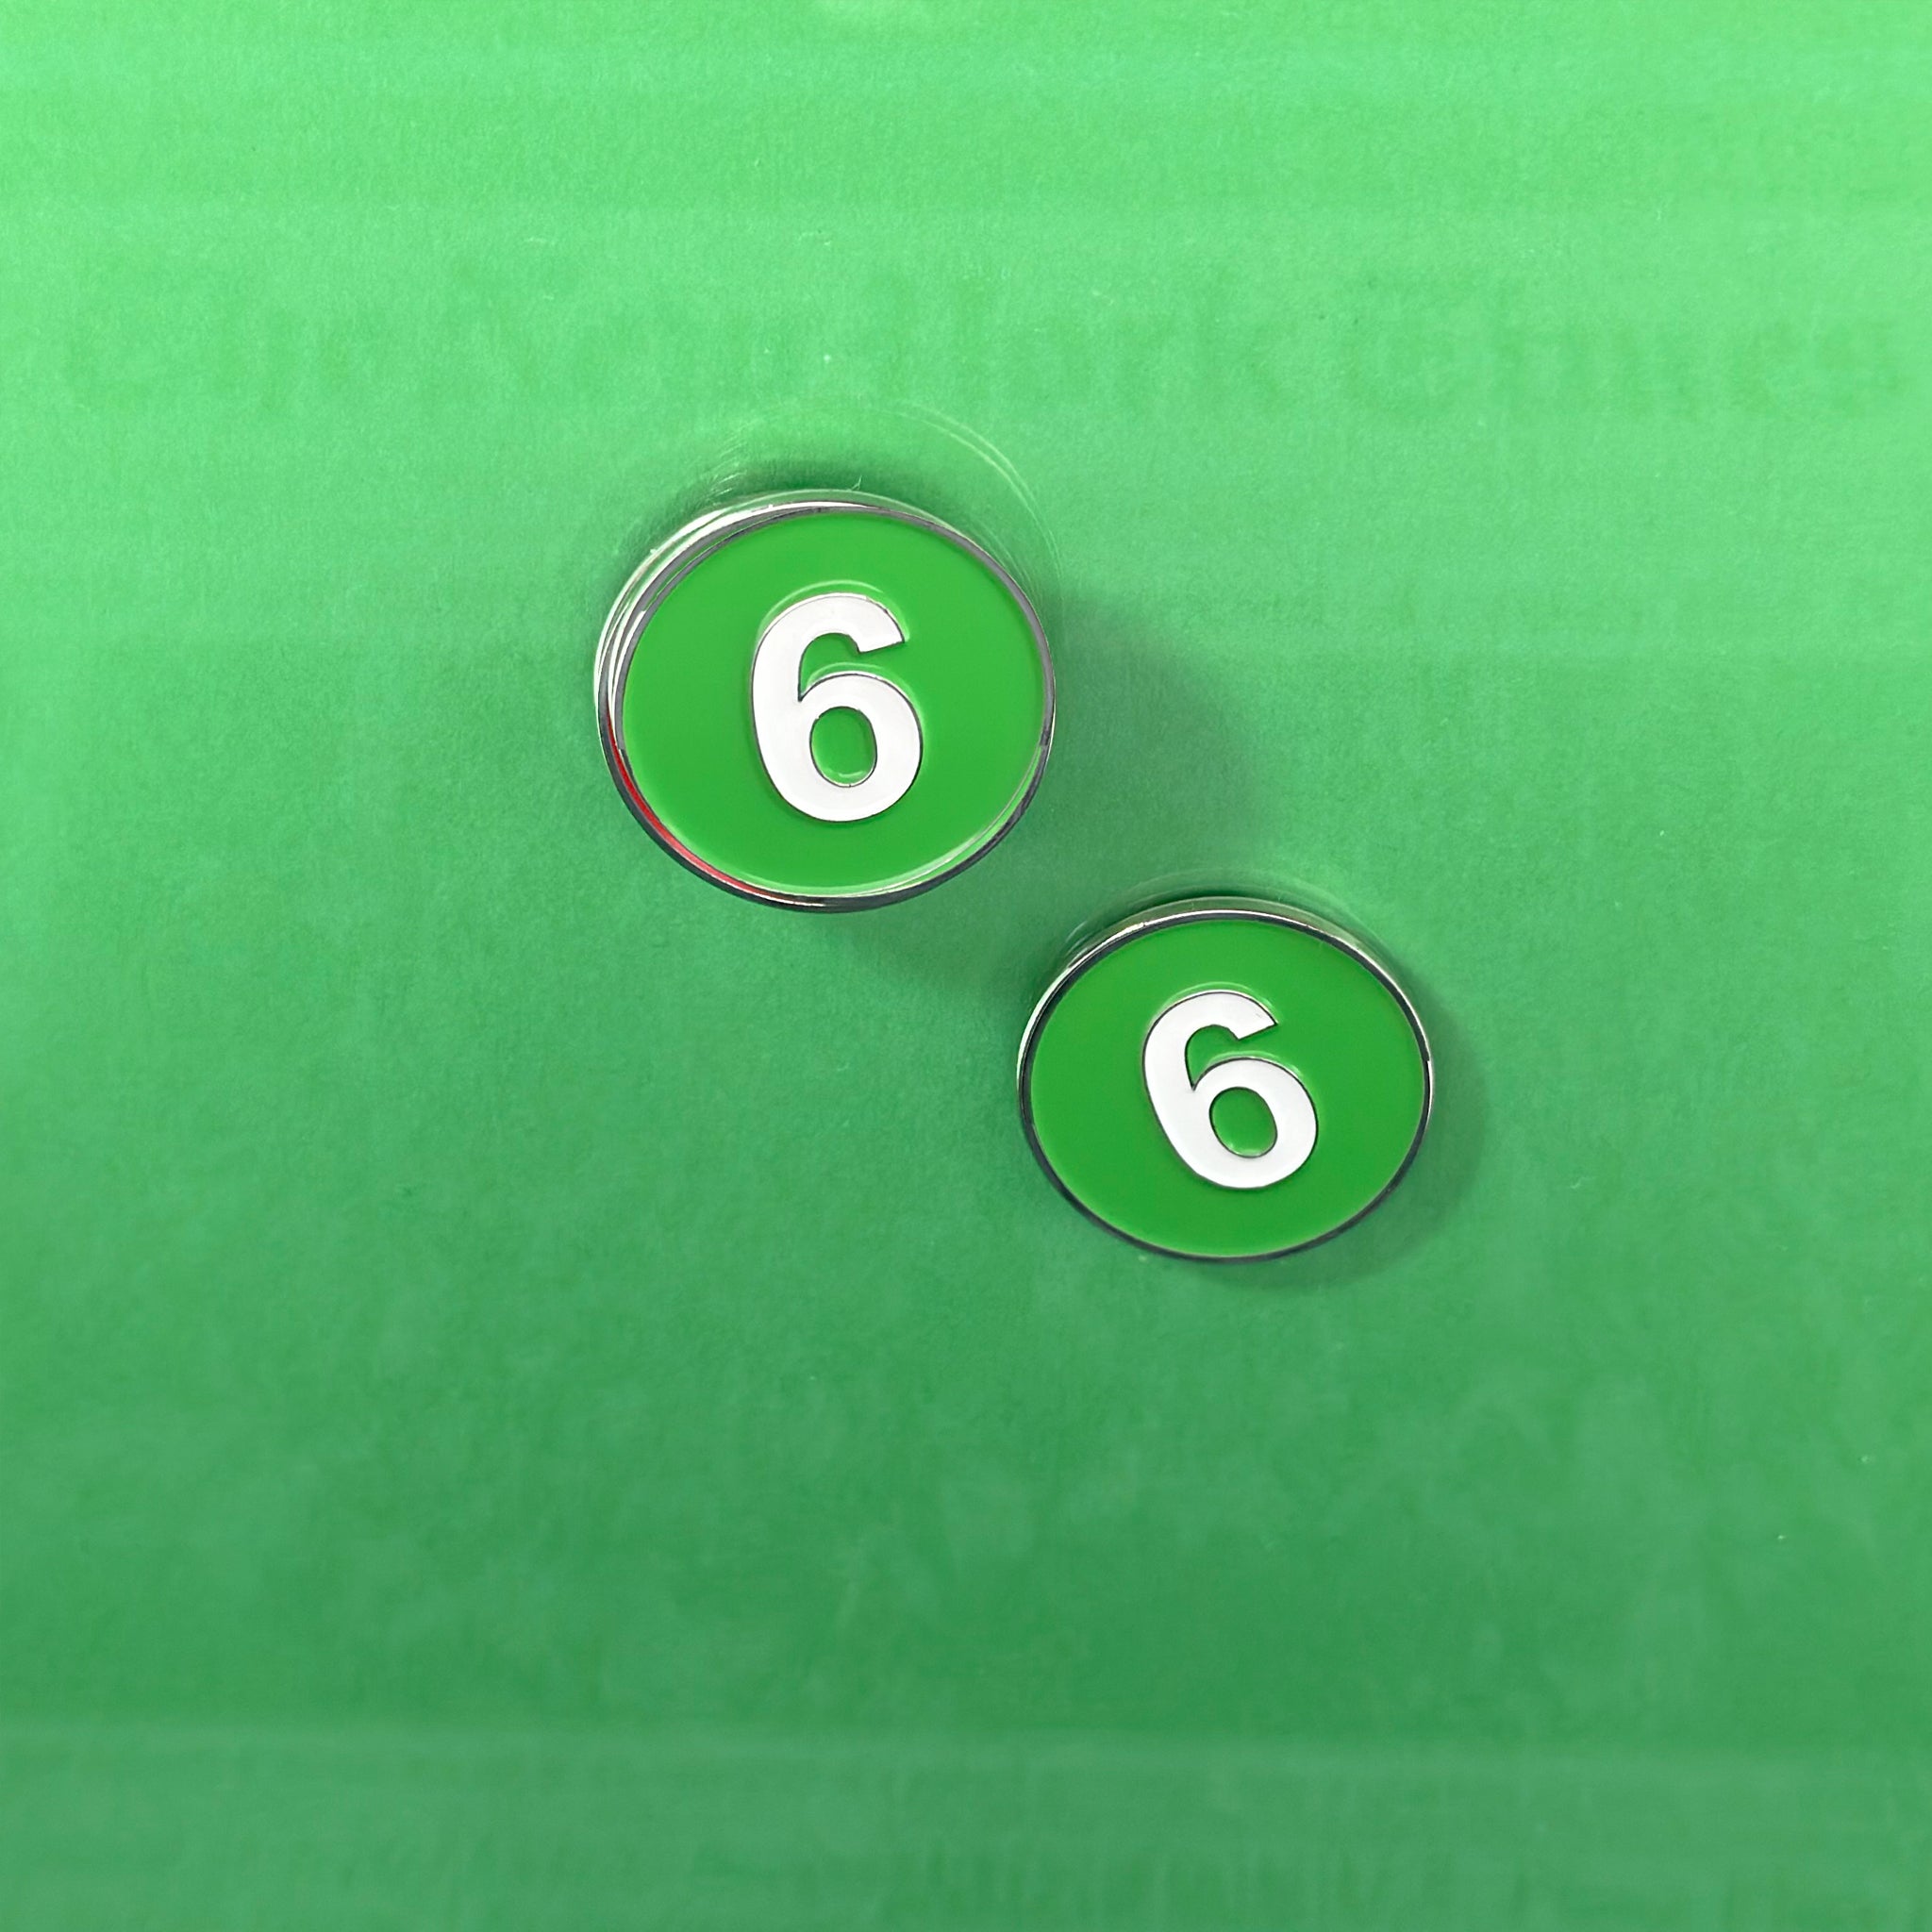 6 train magnetic golf ball marker with New York Times Backdrop over green.